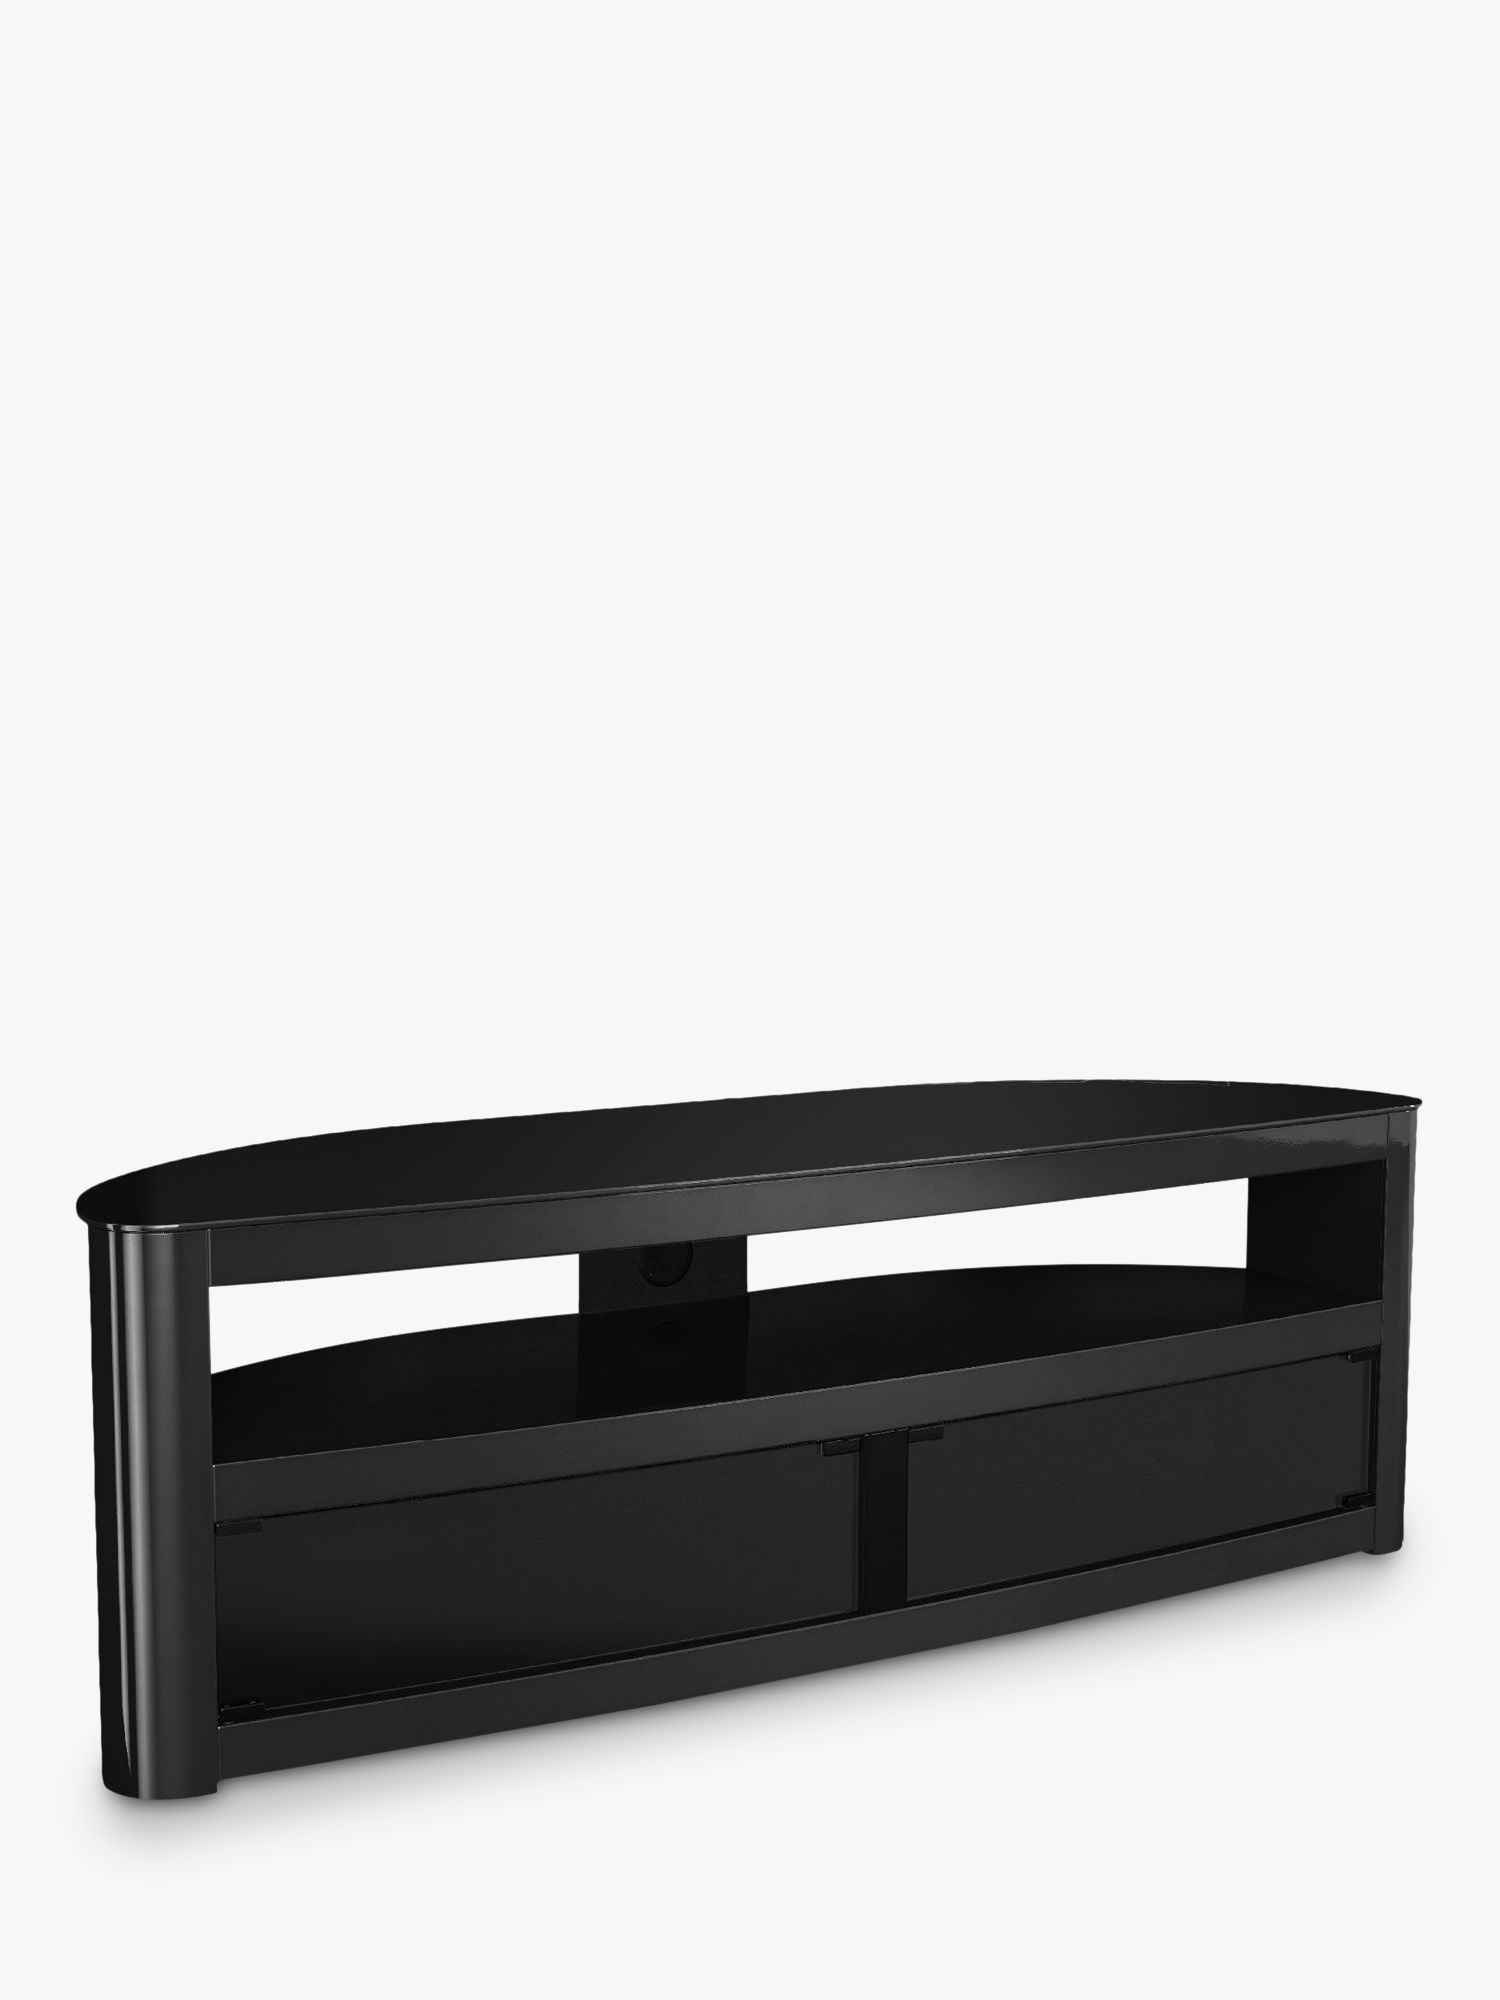 Photo of Avf affinity premium burghley 1500 tv stand for tvs up to 70